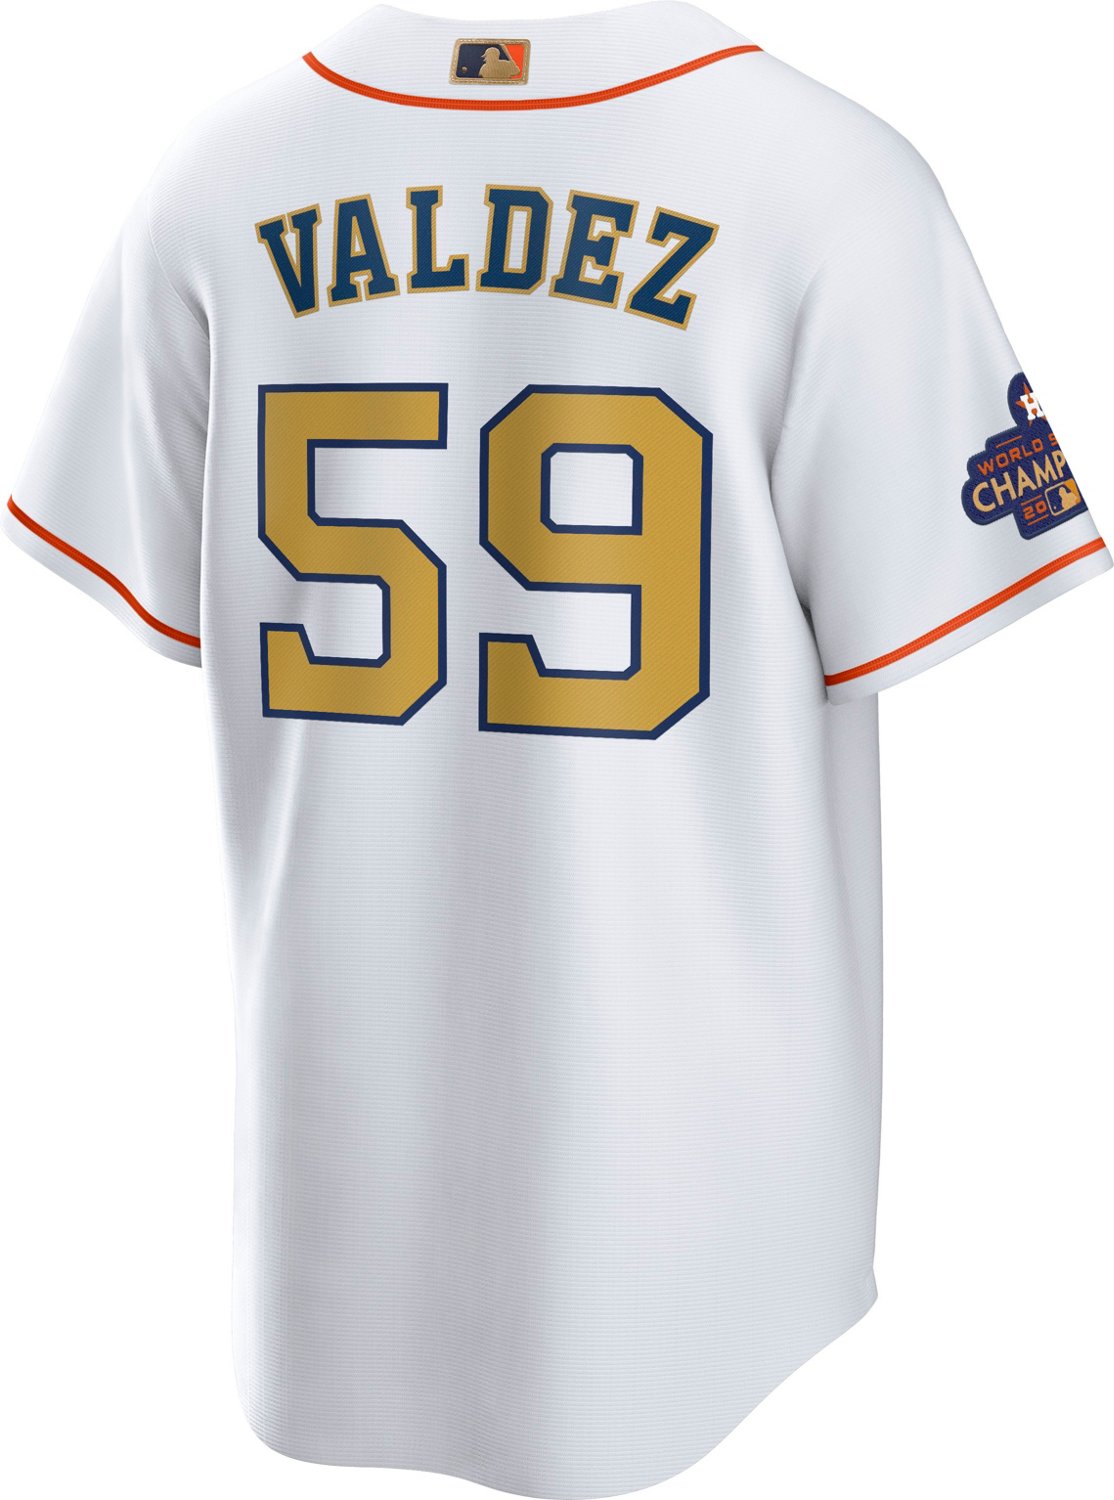 astros jersey at academy